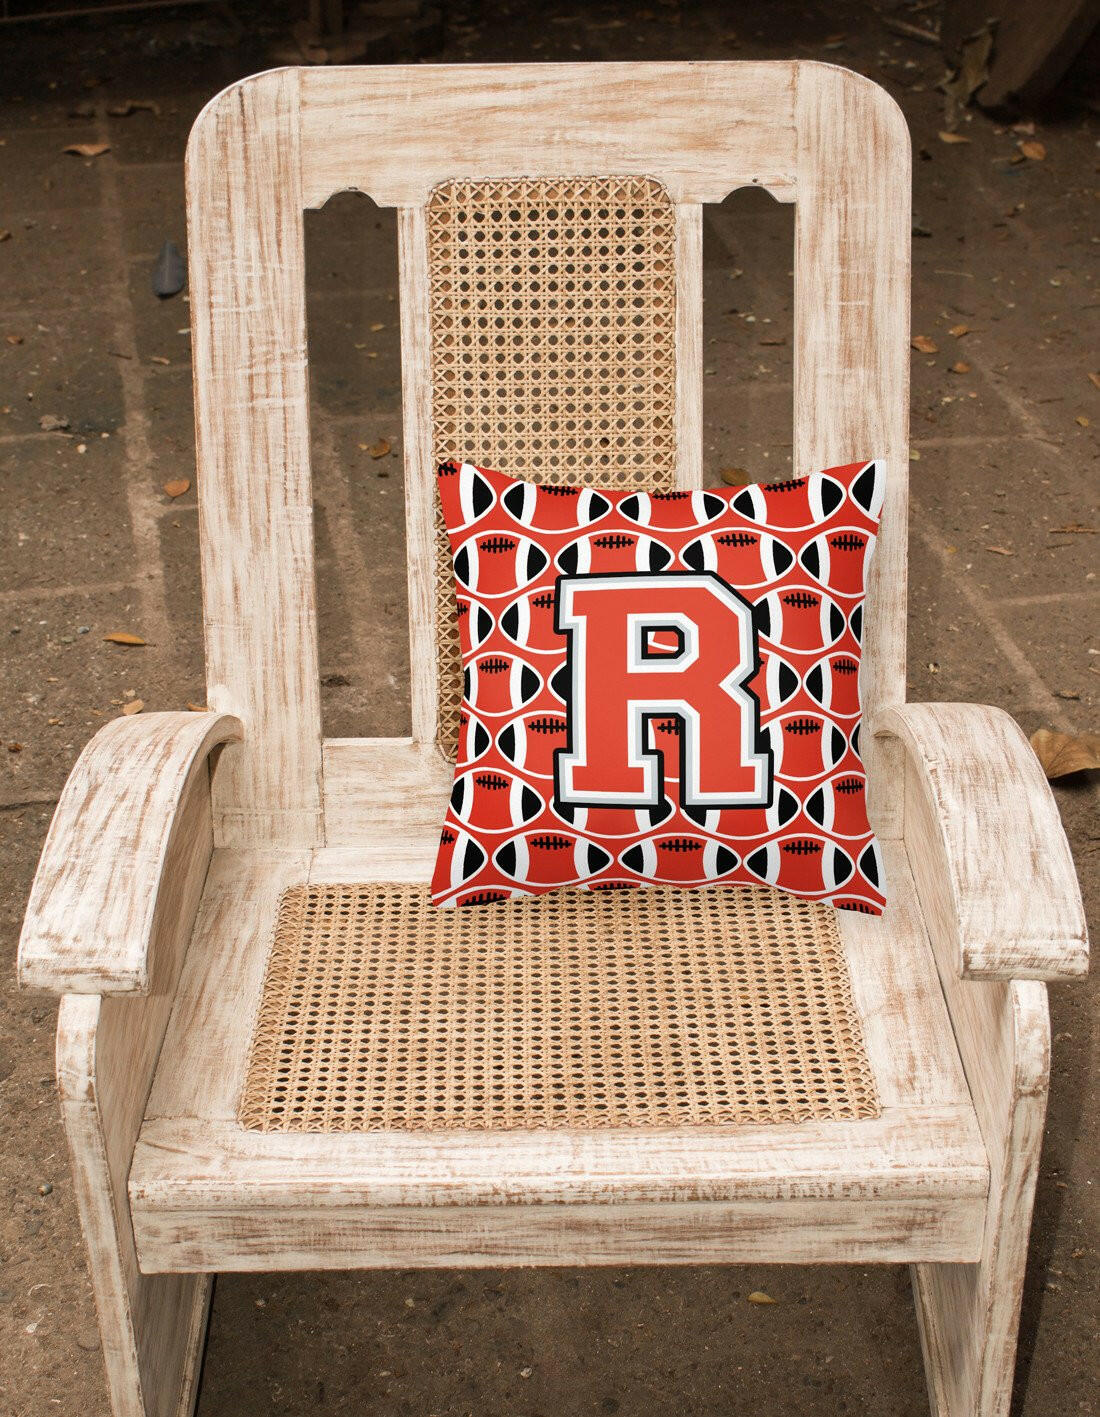 Letter R Football Scarlet and Grey Fabric Decorative Pillow CJ1067-RPW1414 by Caroline's Treasures